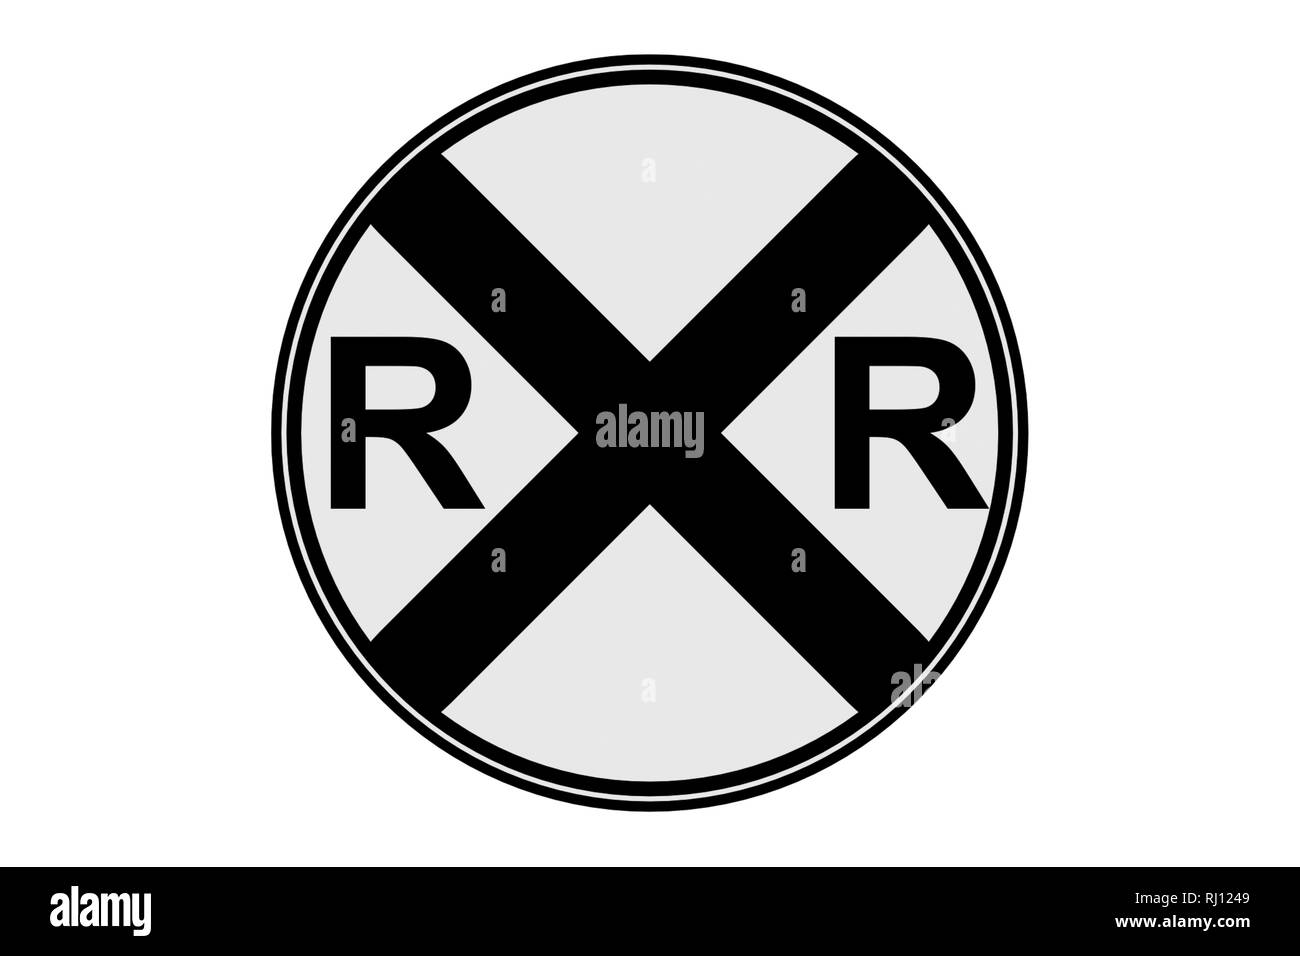 Railroad crossing sign RR icon black and white isolated on white background Stock Photo